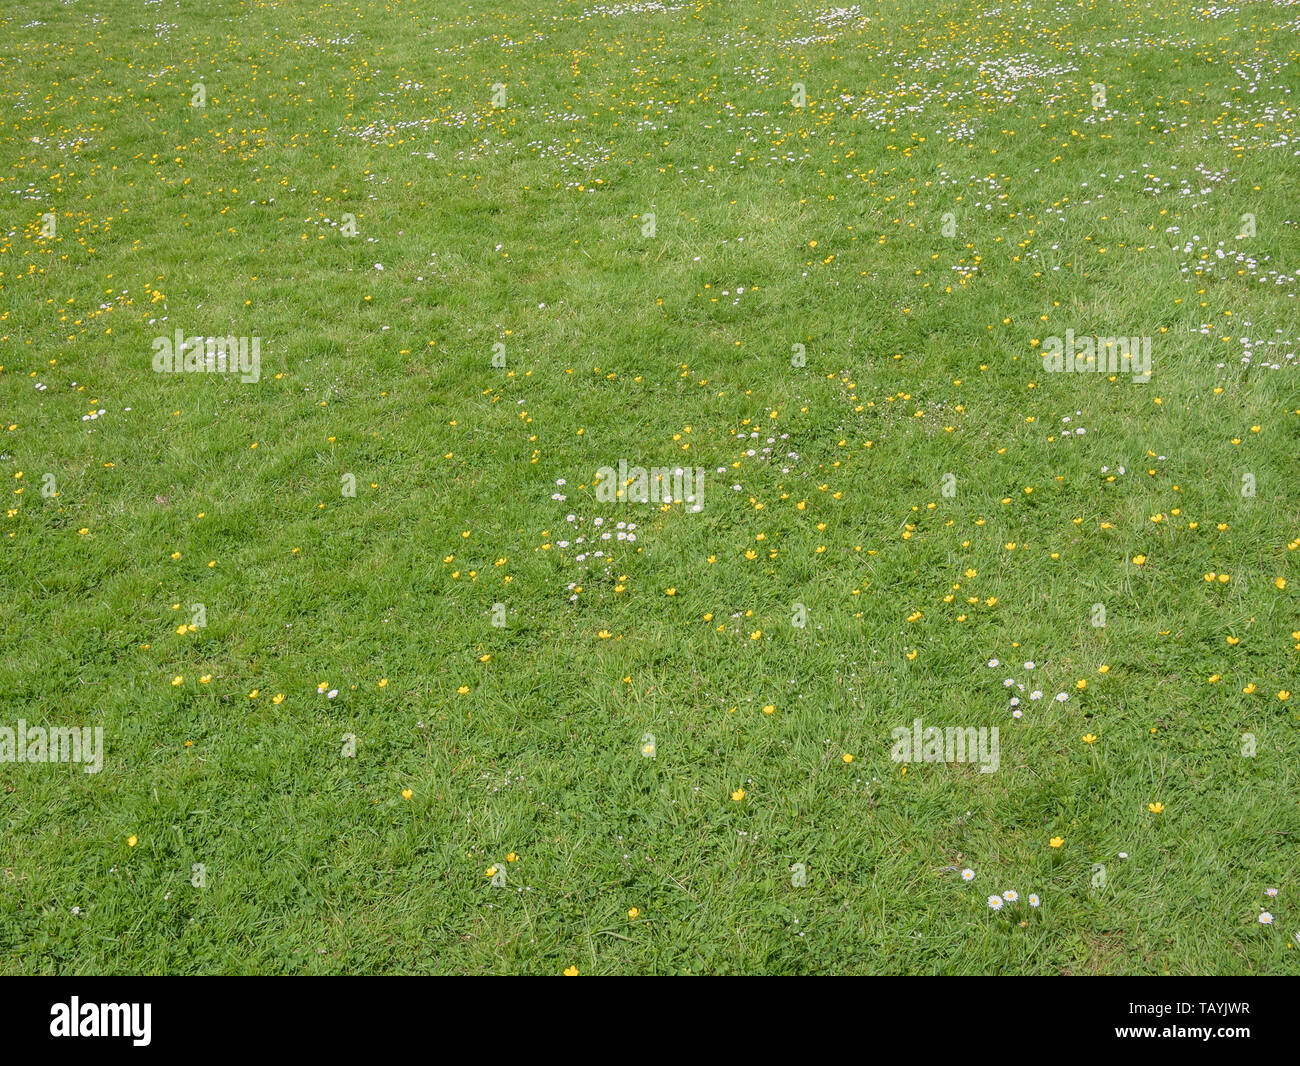 Creeping Buttercups / Ranunculus repens & Daisies / Bellis perennis. Concept problem lawn weeds, overtaken by weeds, weeds overtaking, patch of grass. Stock Photo